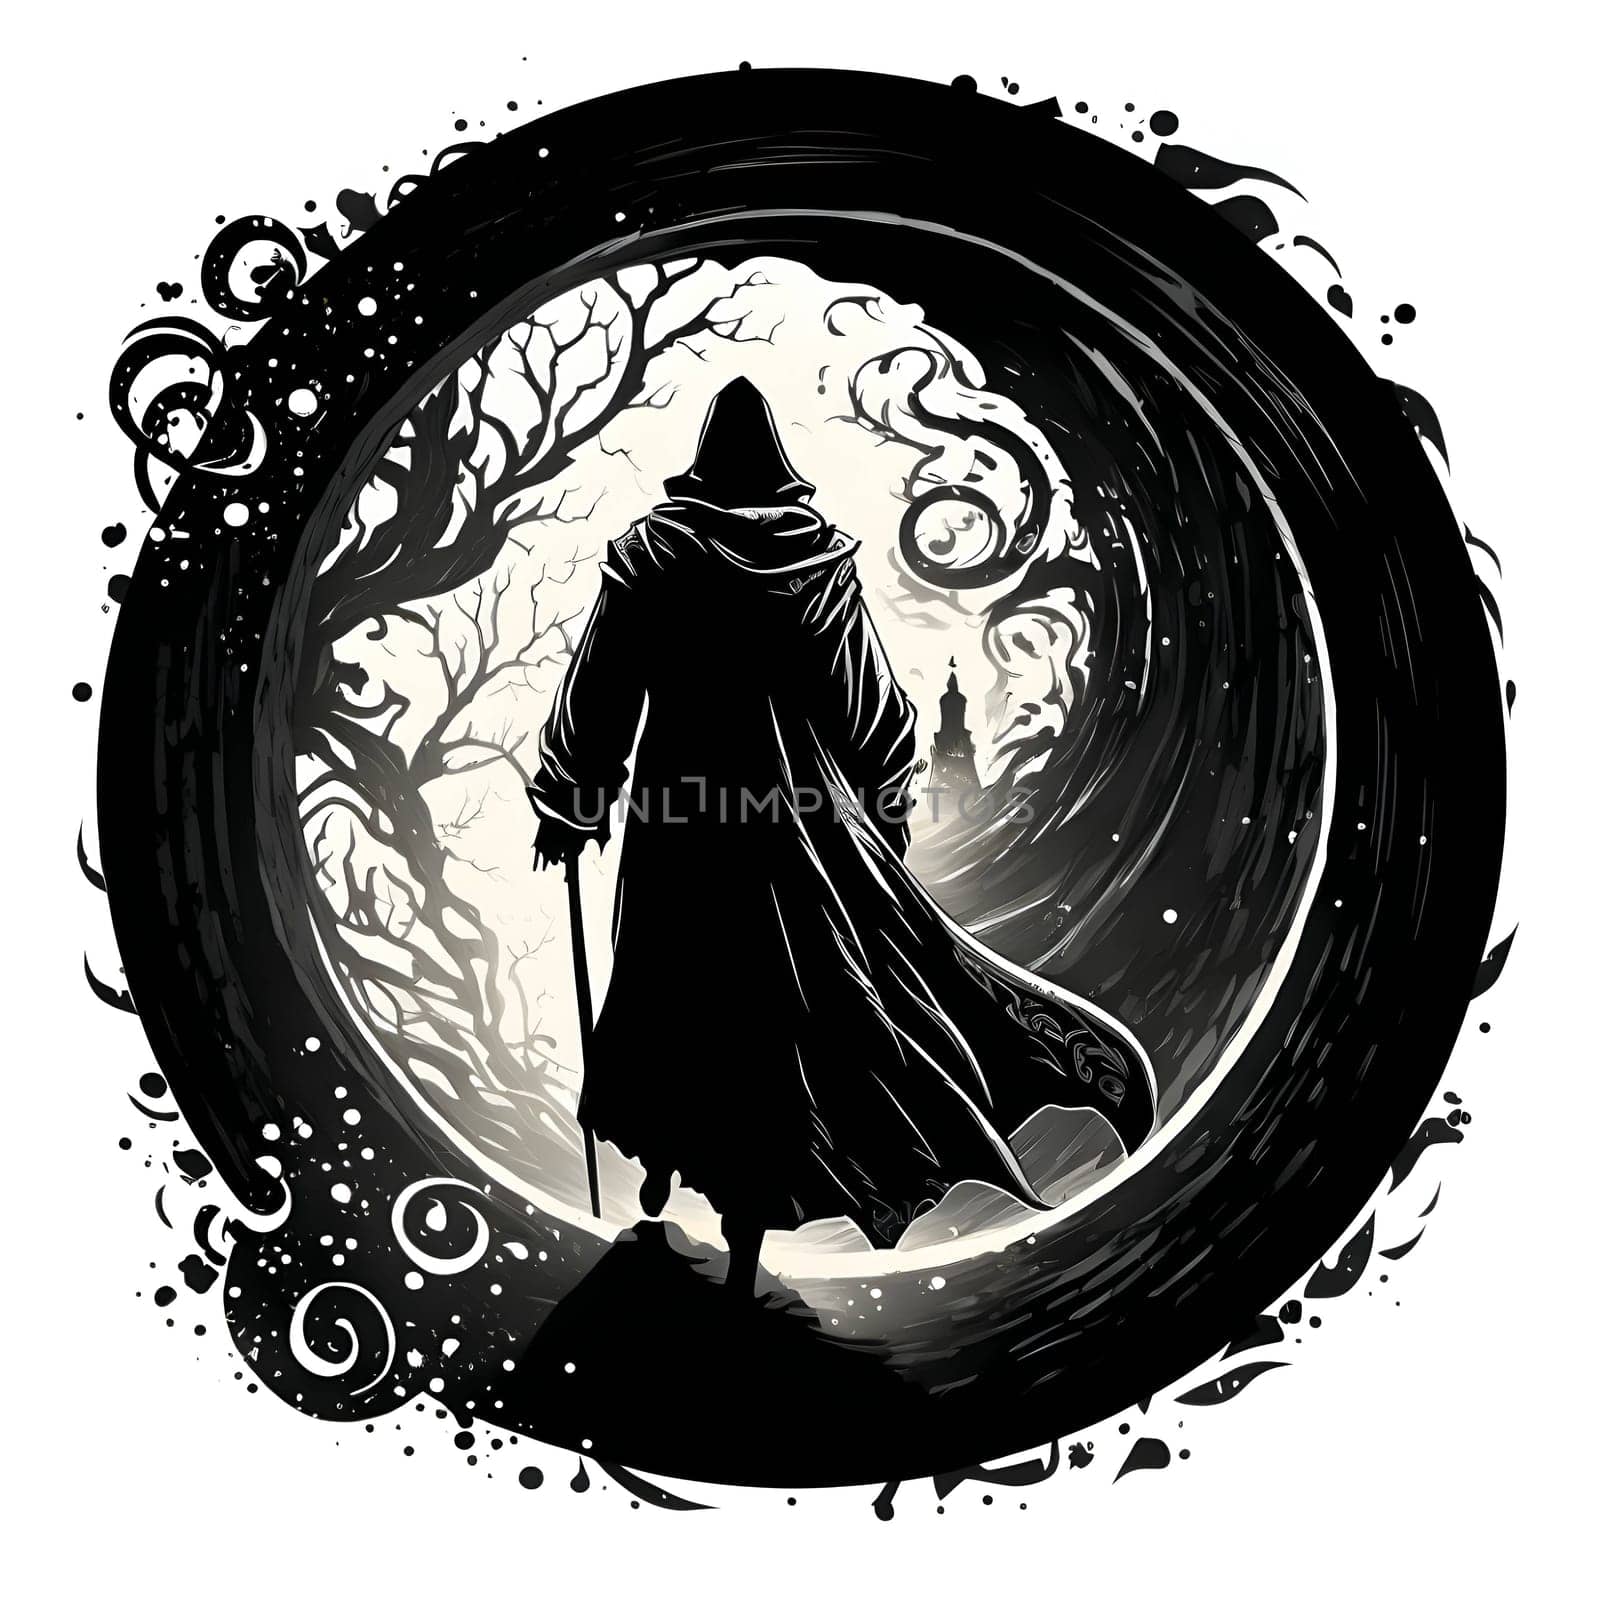 Vector illustration of a man in the hood in black silhouette against a clean white background, capturing graceful forms.